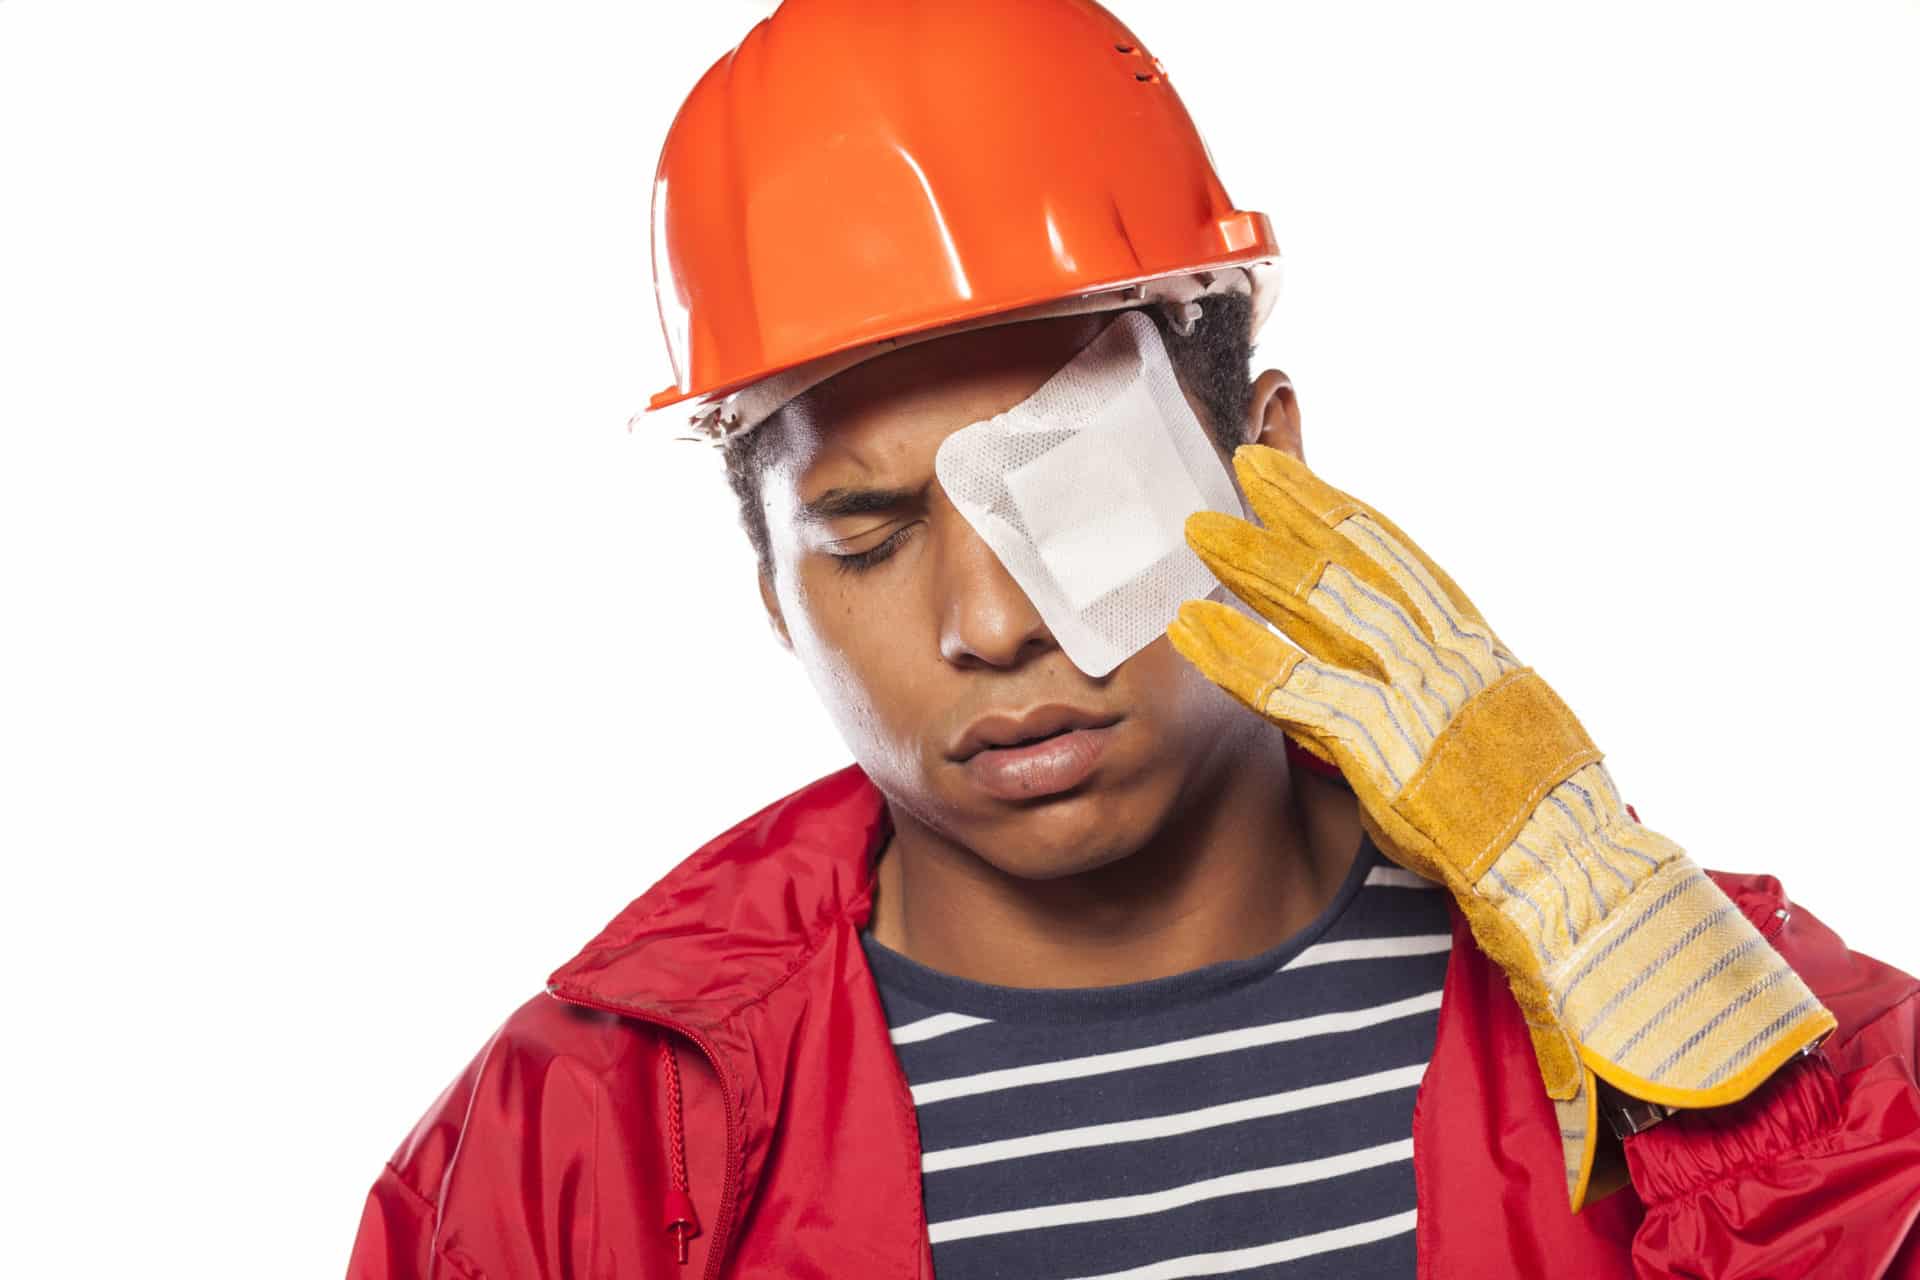 When You’re Involved In a Construction Site Accident